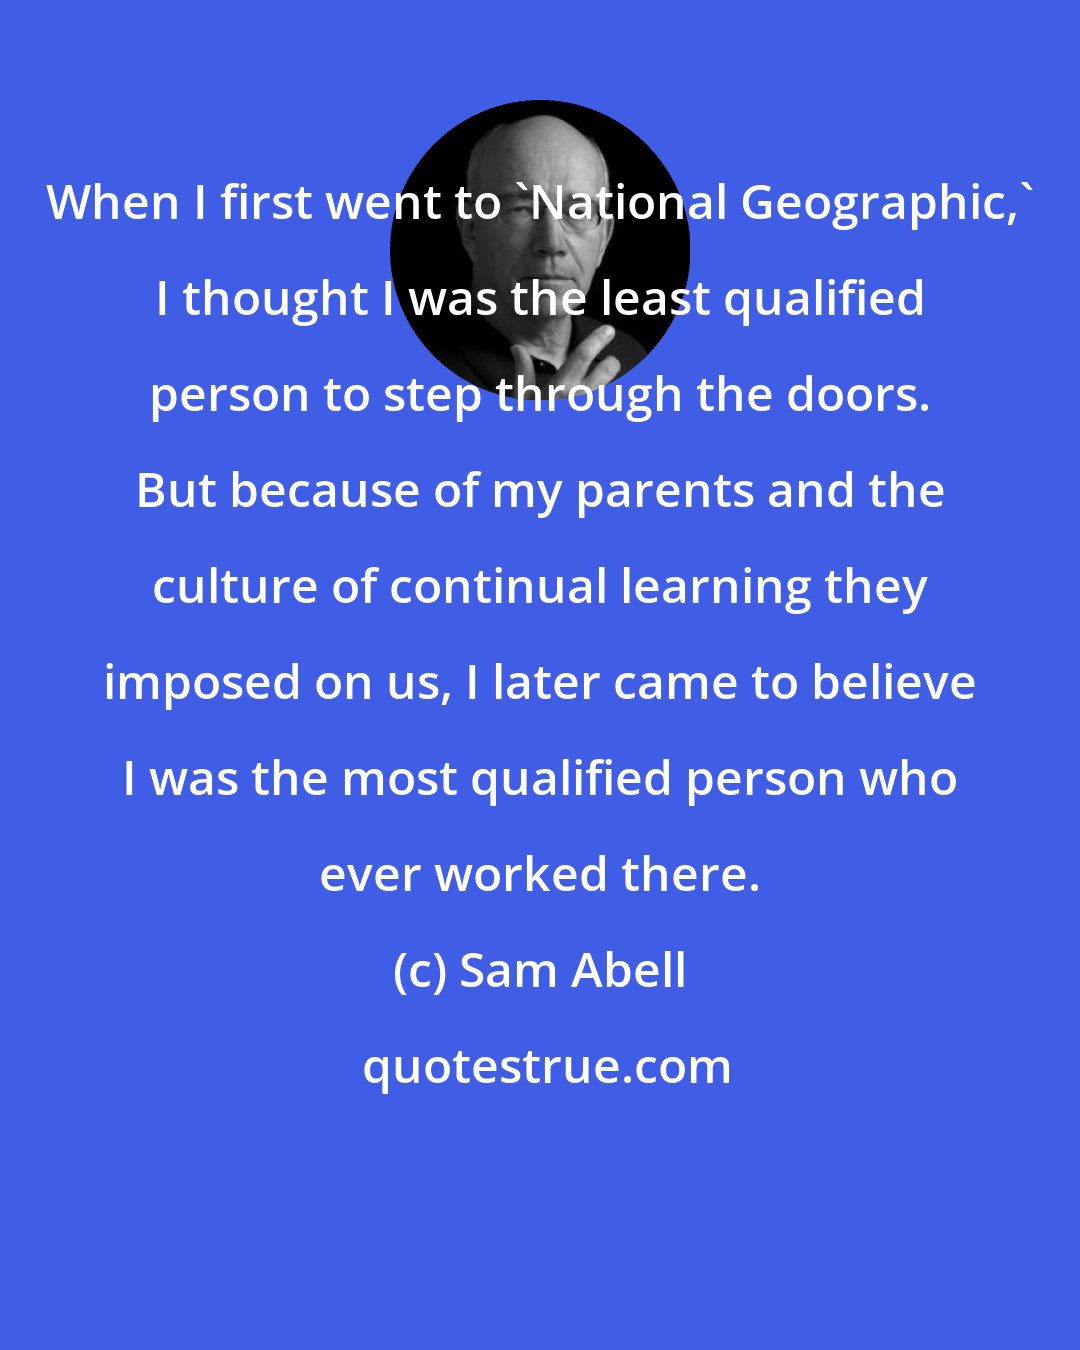 Sam Abell: When I first went to 'National Geographic,' I thought I was the least qualified person to step through the doors. But because of my parents and the culture of continual learning they imposed on us, I later came to believe I was the most qualified person who ever worked there.